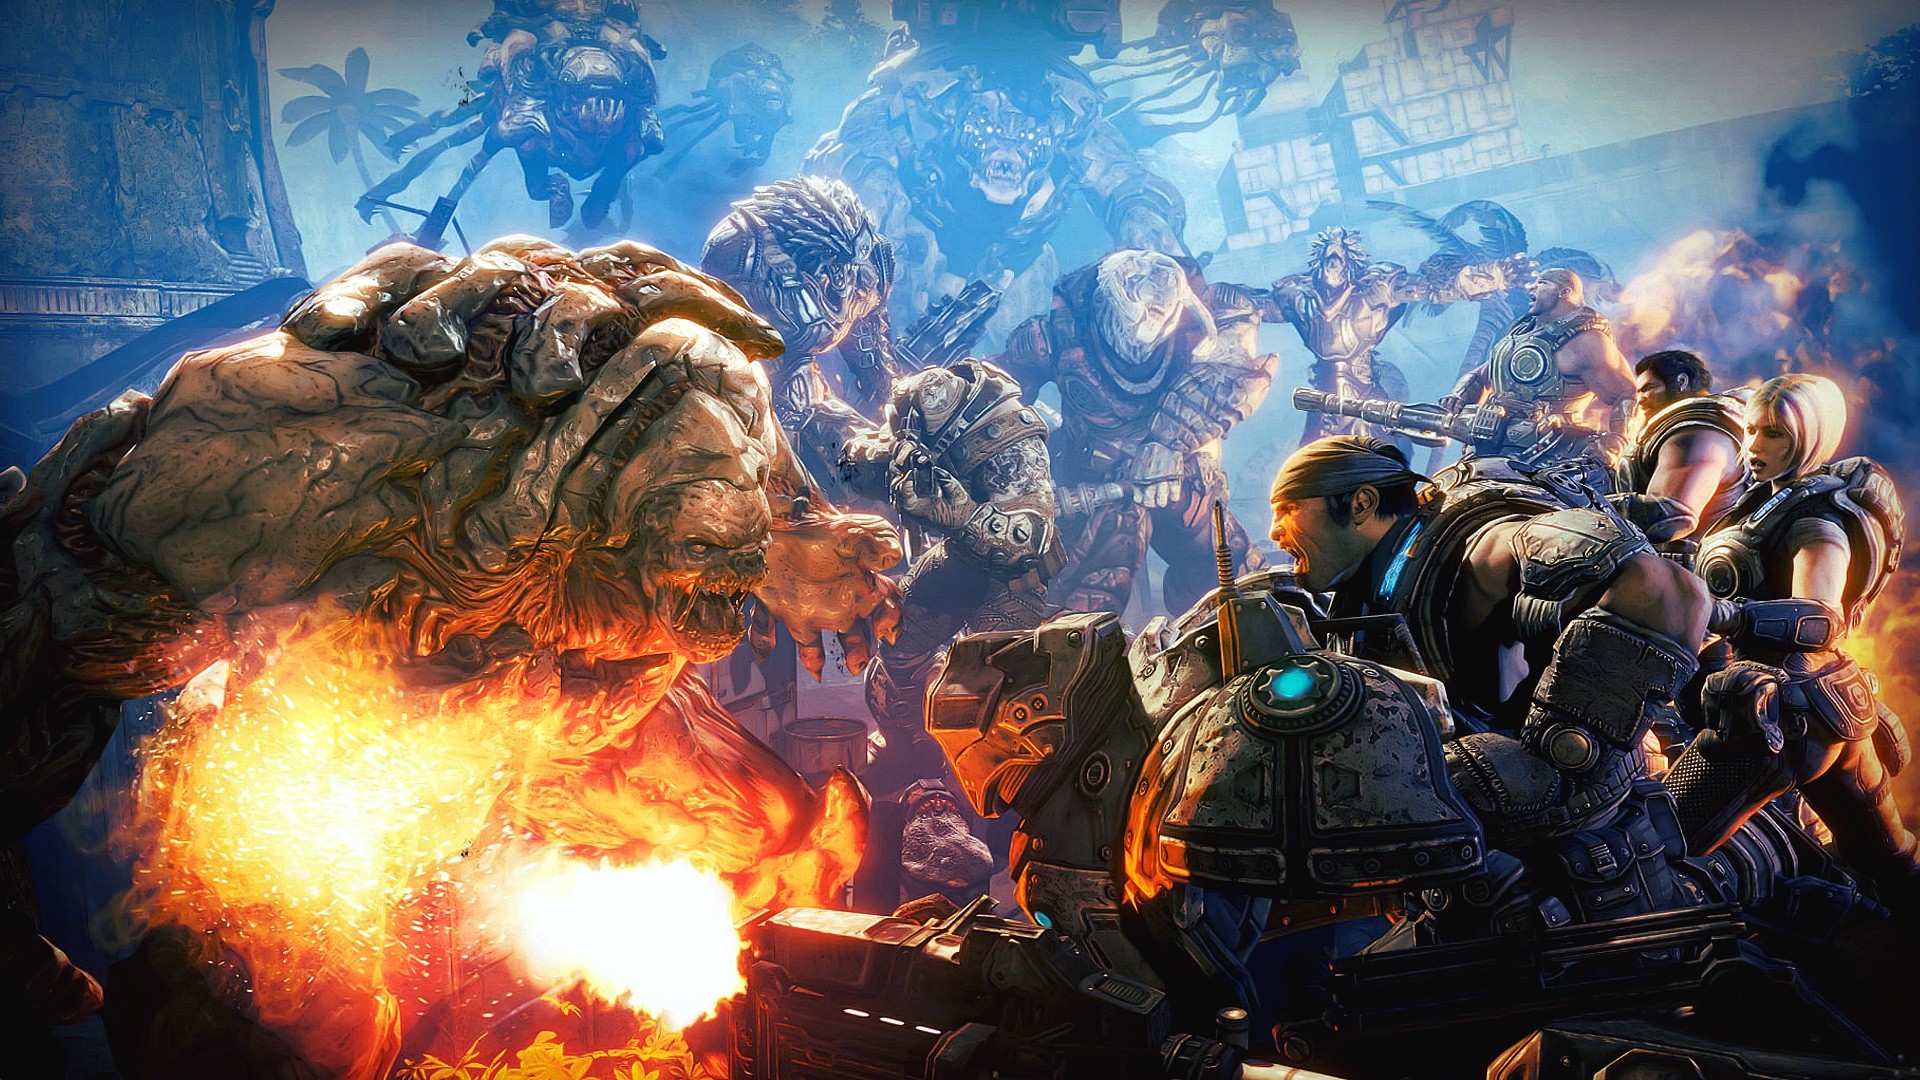 video game, gears of war 3, gears of war High Definition image